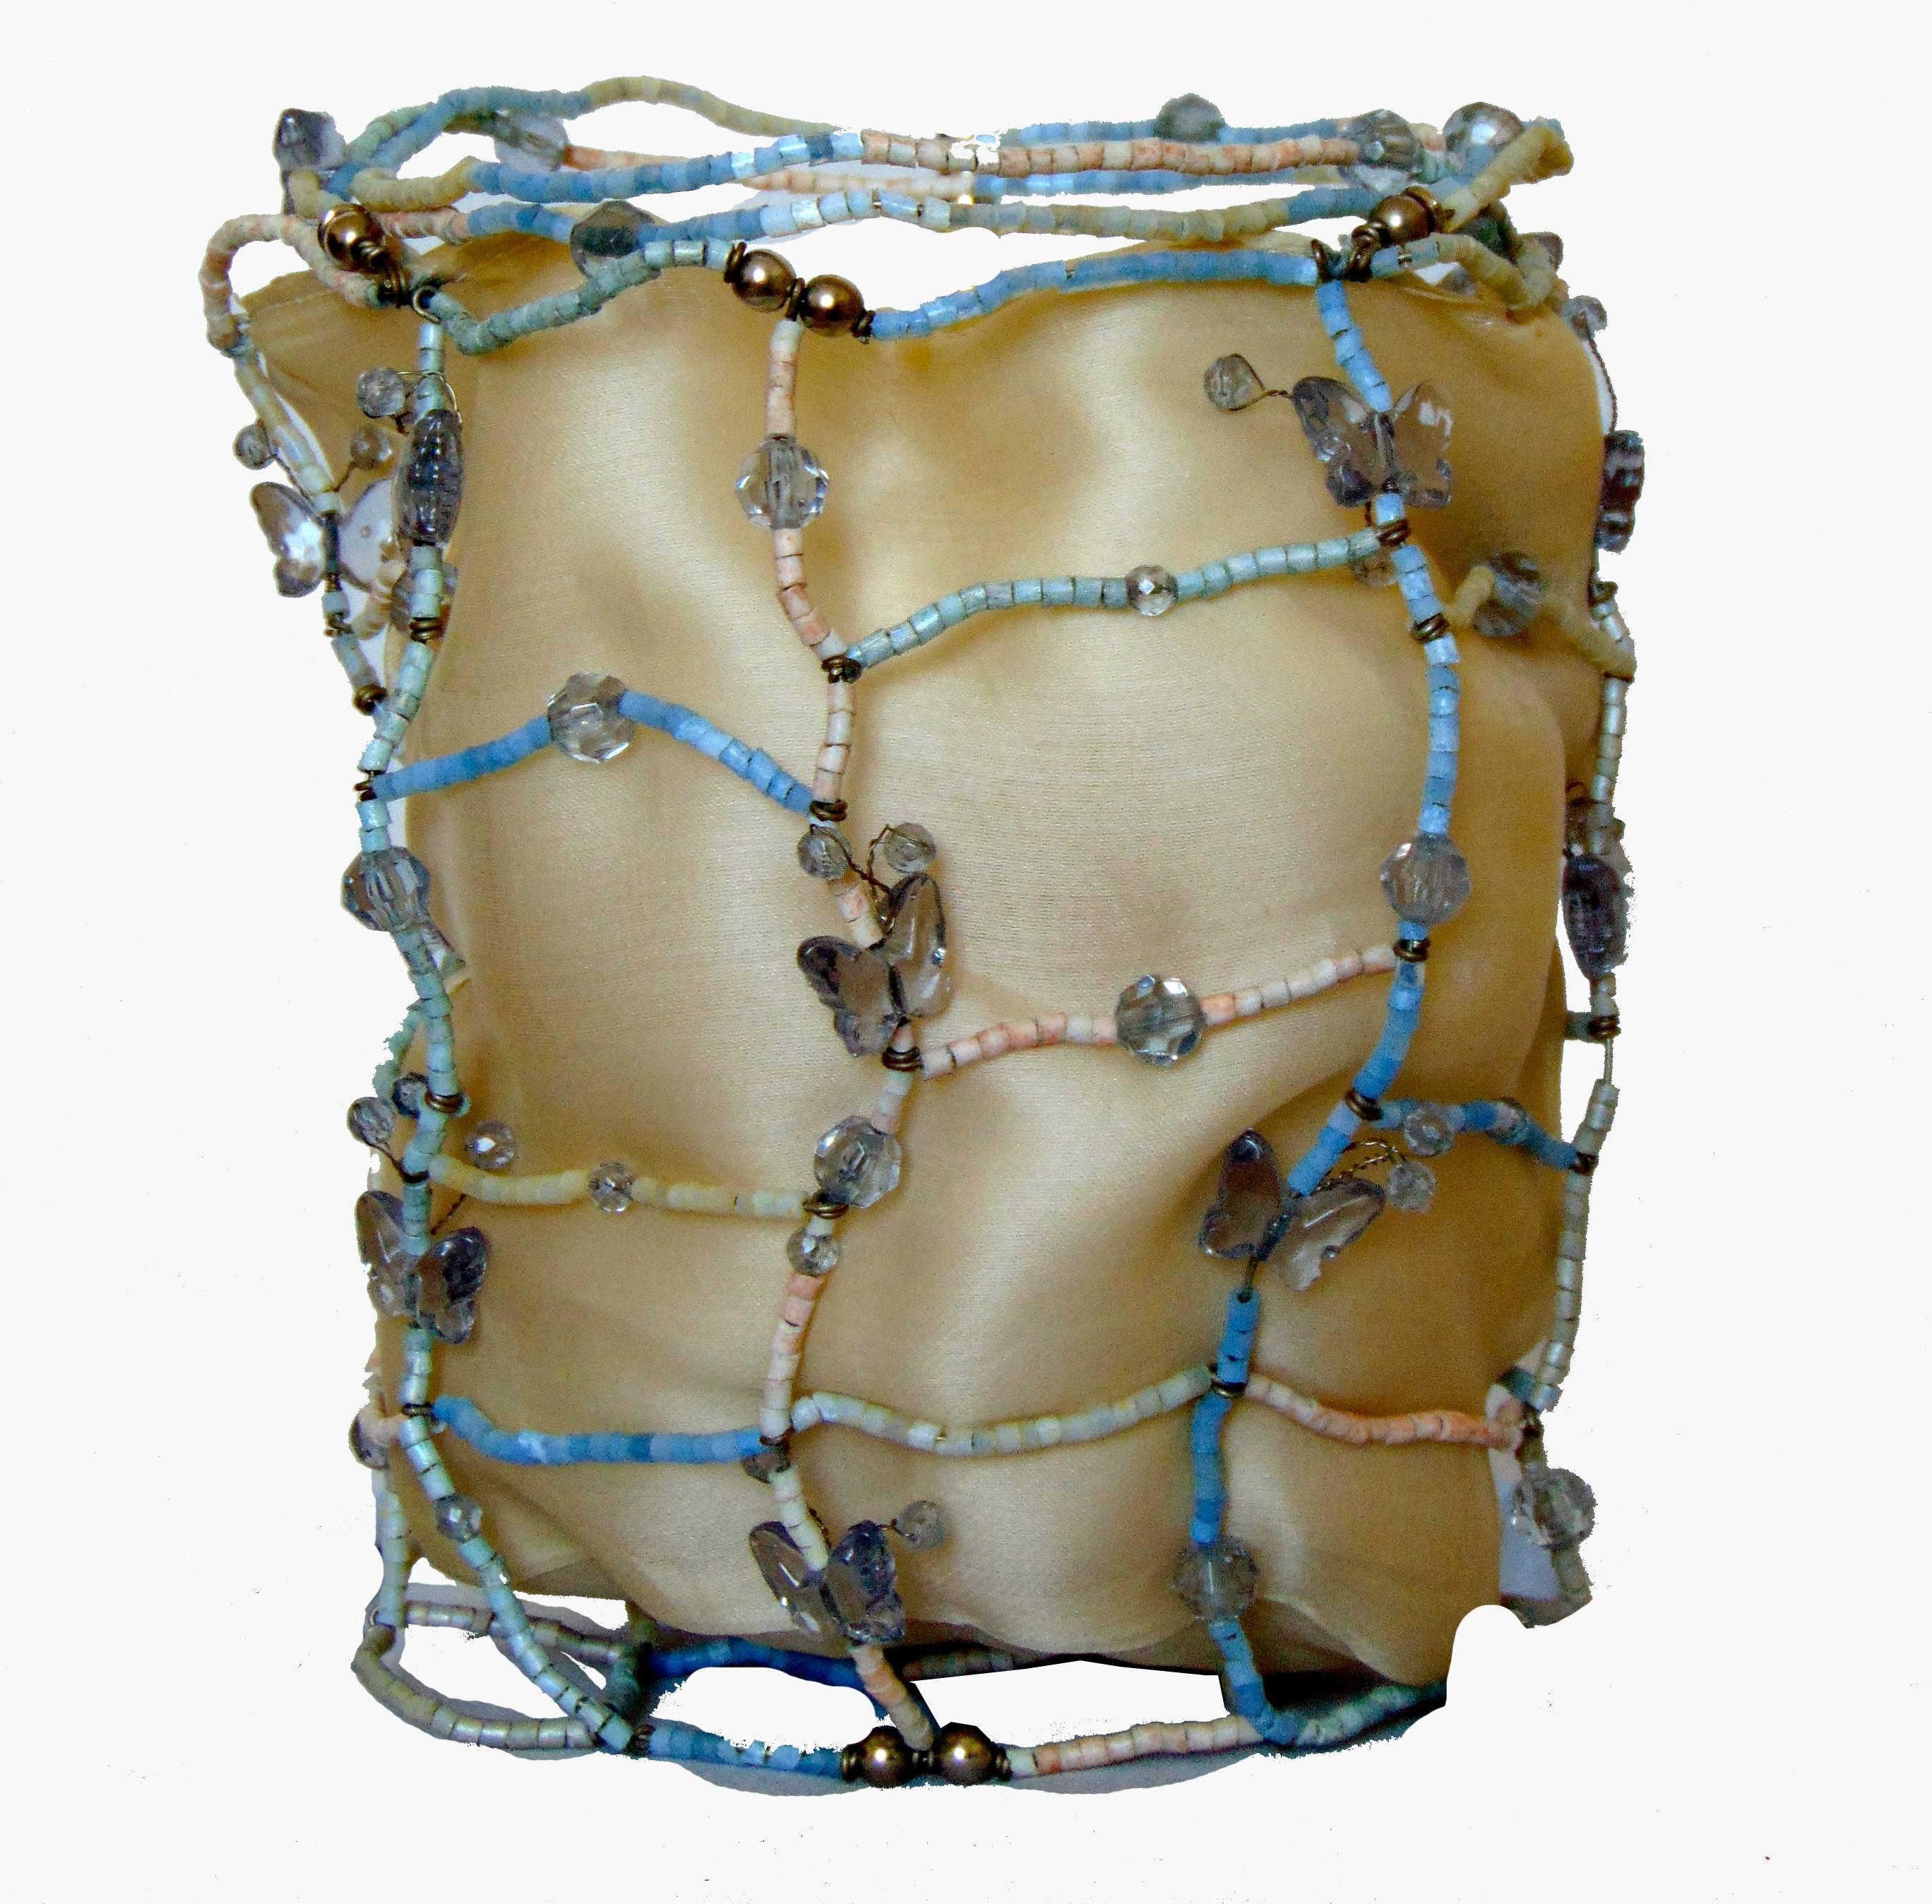 Hard to find bag from Bottega Veneta.  Made with a wire frame covered in pale powder blue and white beads, it features gemstones and tiny butterflies throughout.  Fully lined in cram silk, it has two dainty wrap ties at top.  Stamped Bottega Veneta